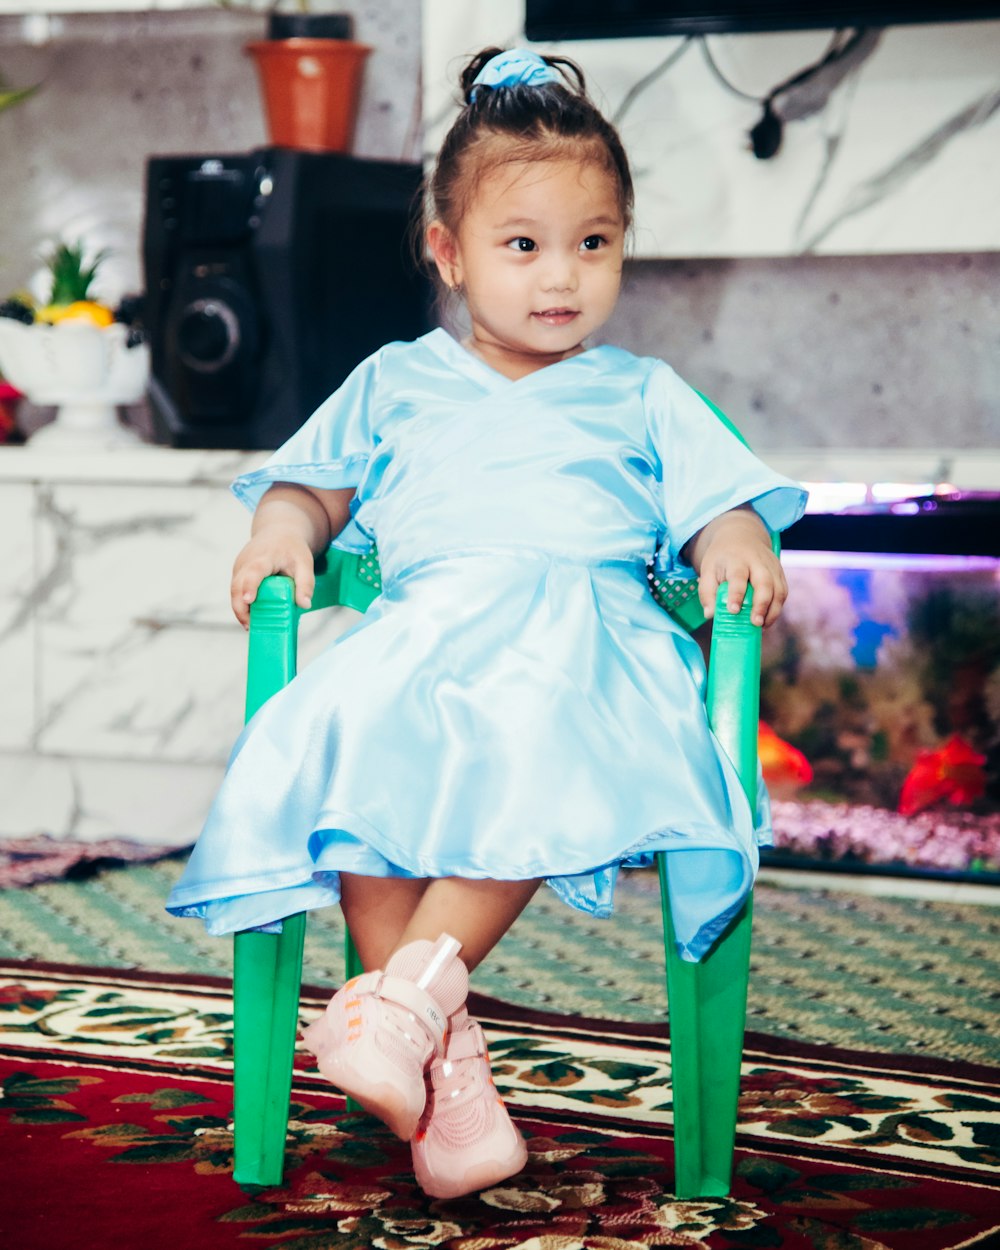 girl in blue dress sitting on green chair